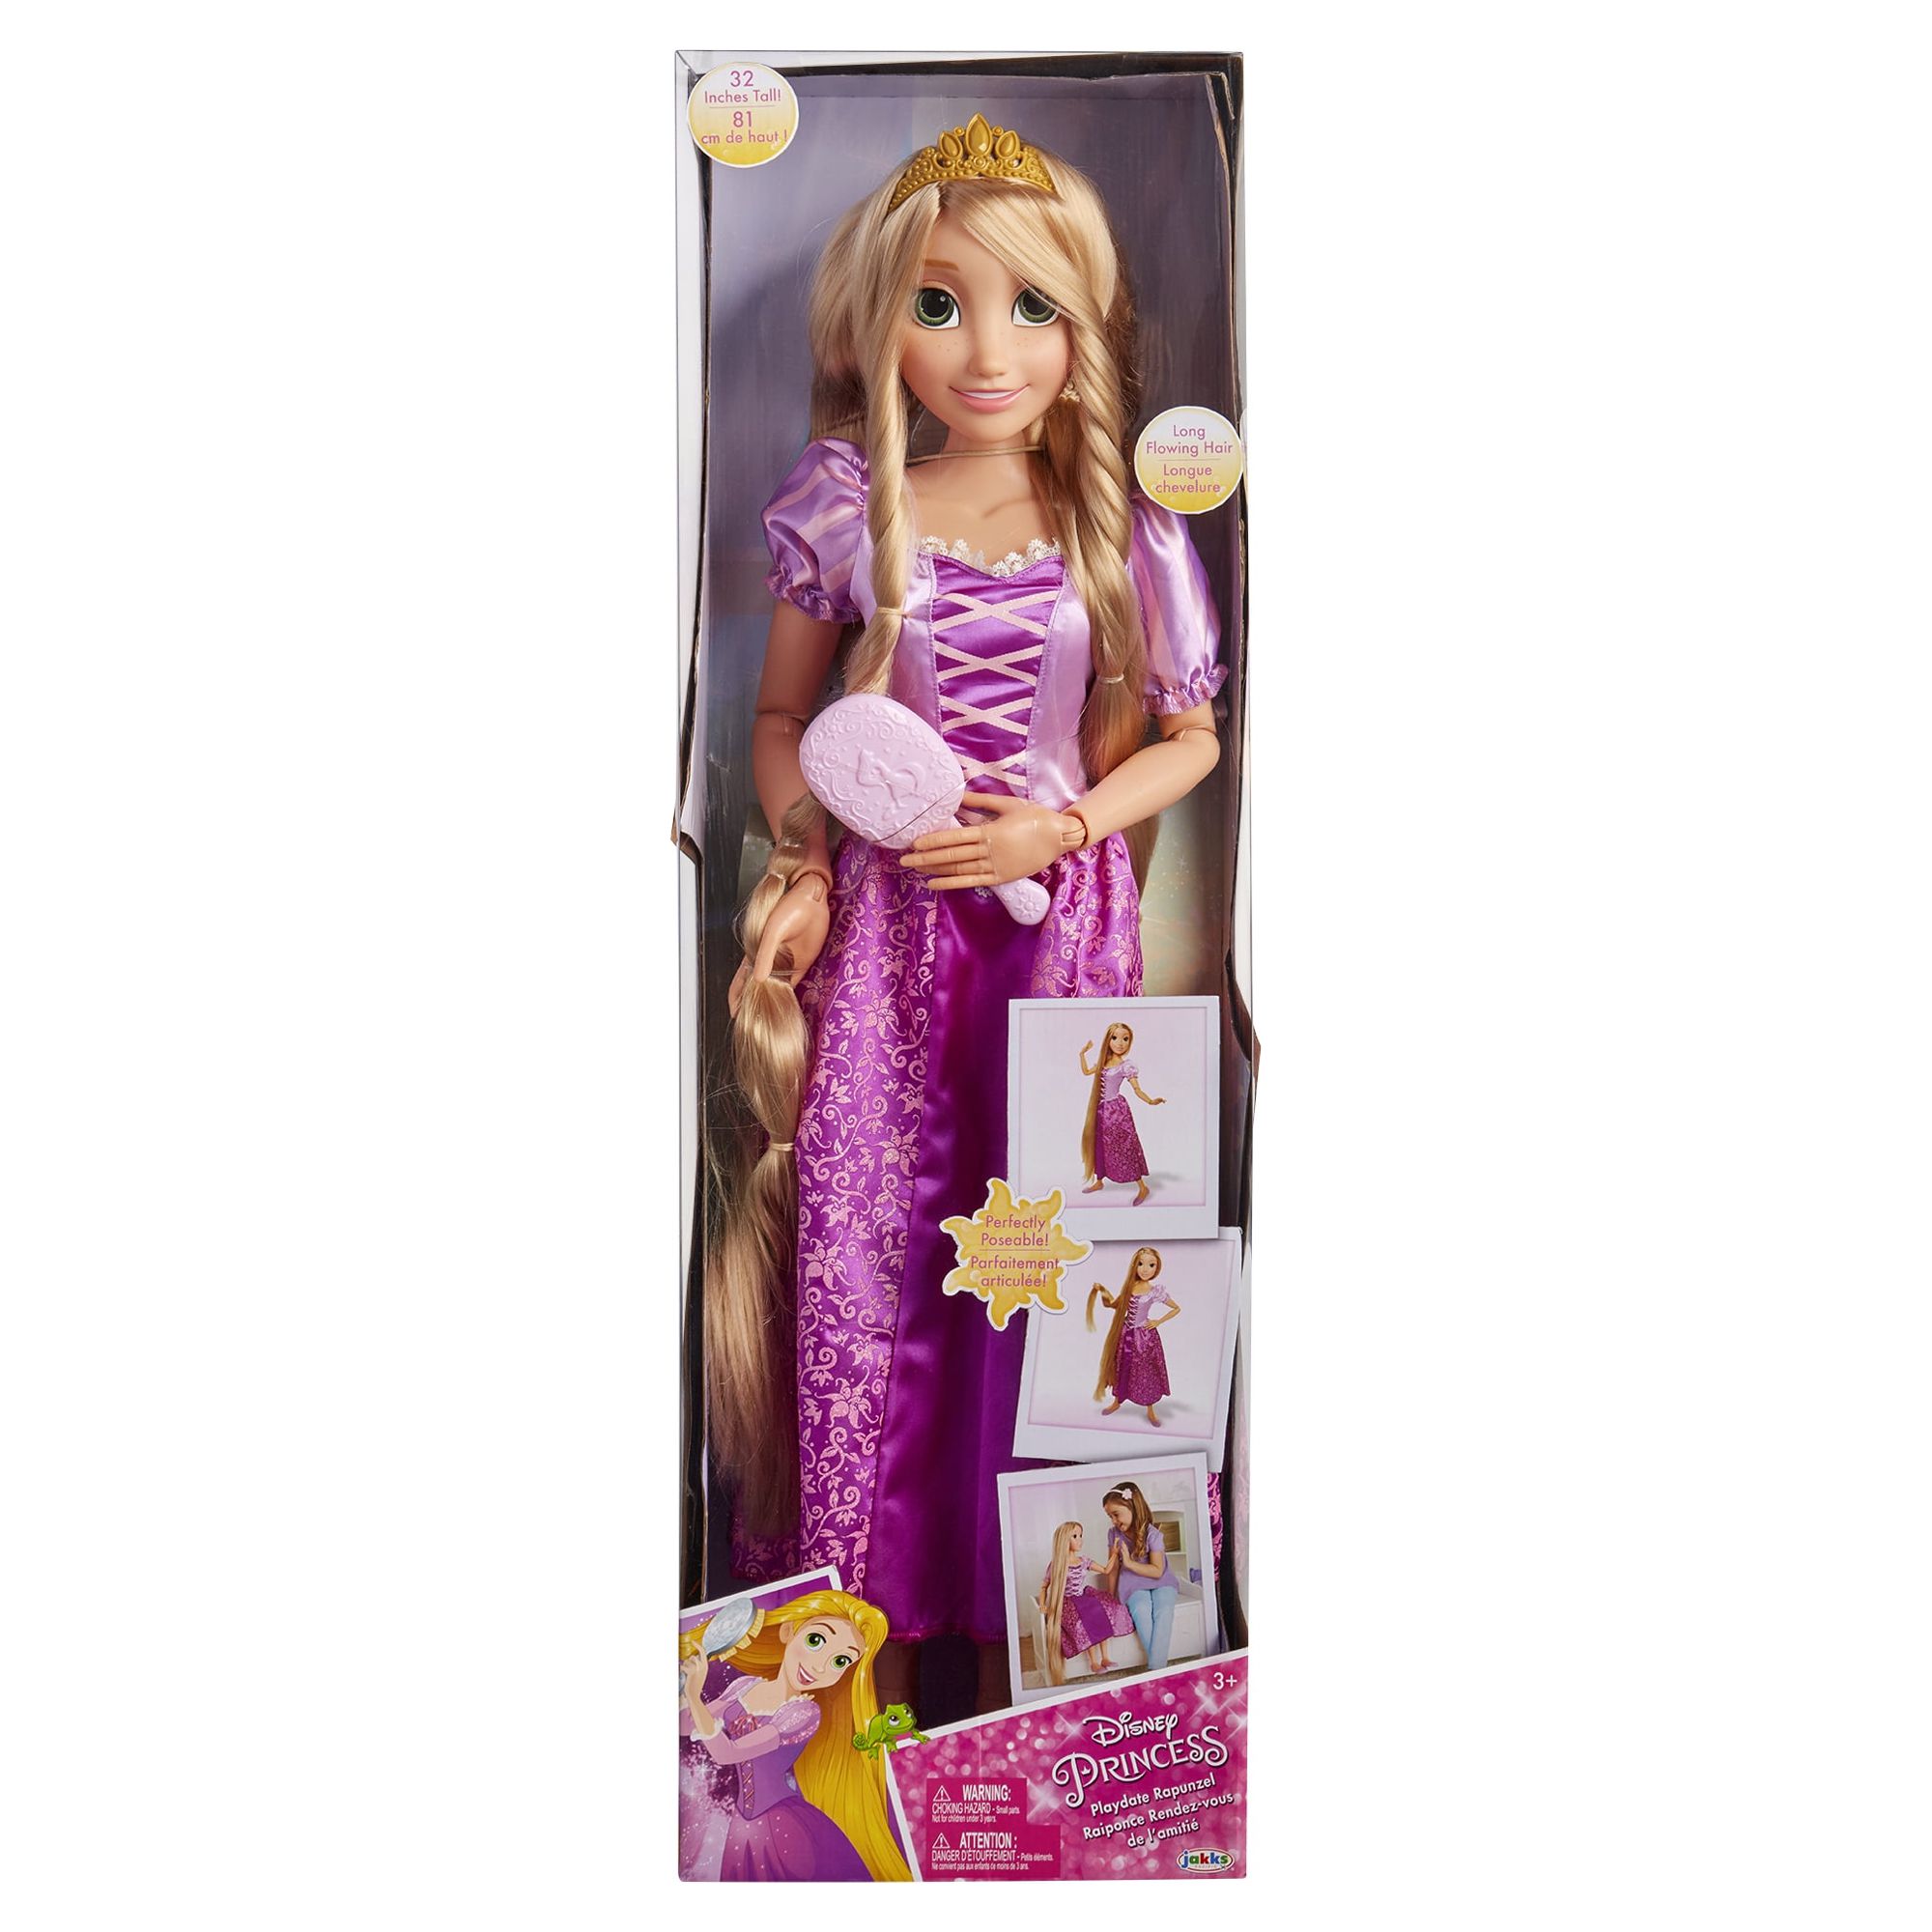 Disney Princess 32 inch Playdate Rapunzel Doll, for Children Ages 3+ - image 6 of 8